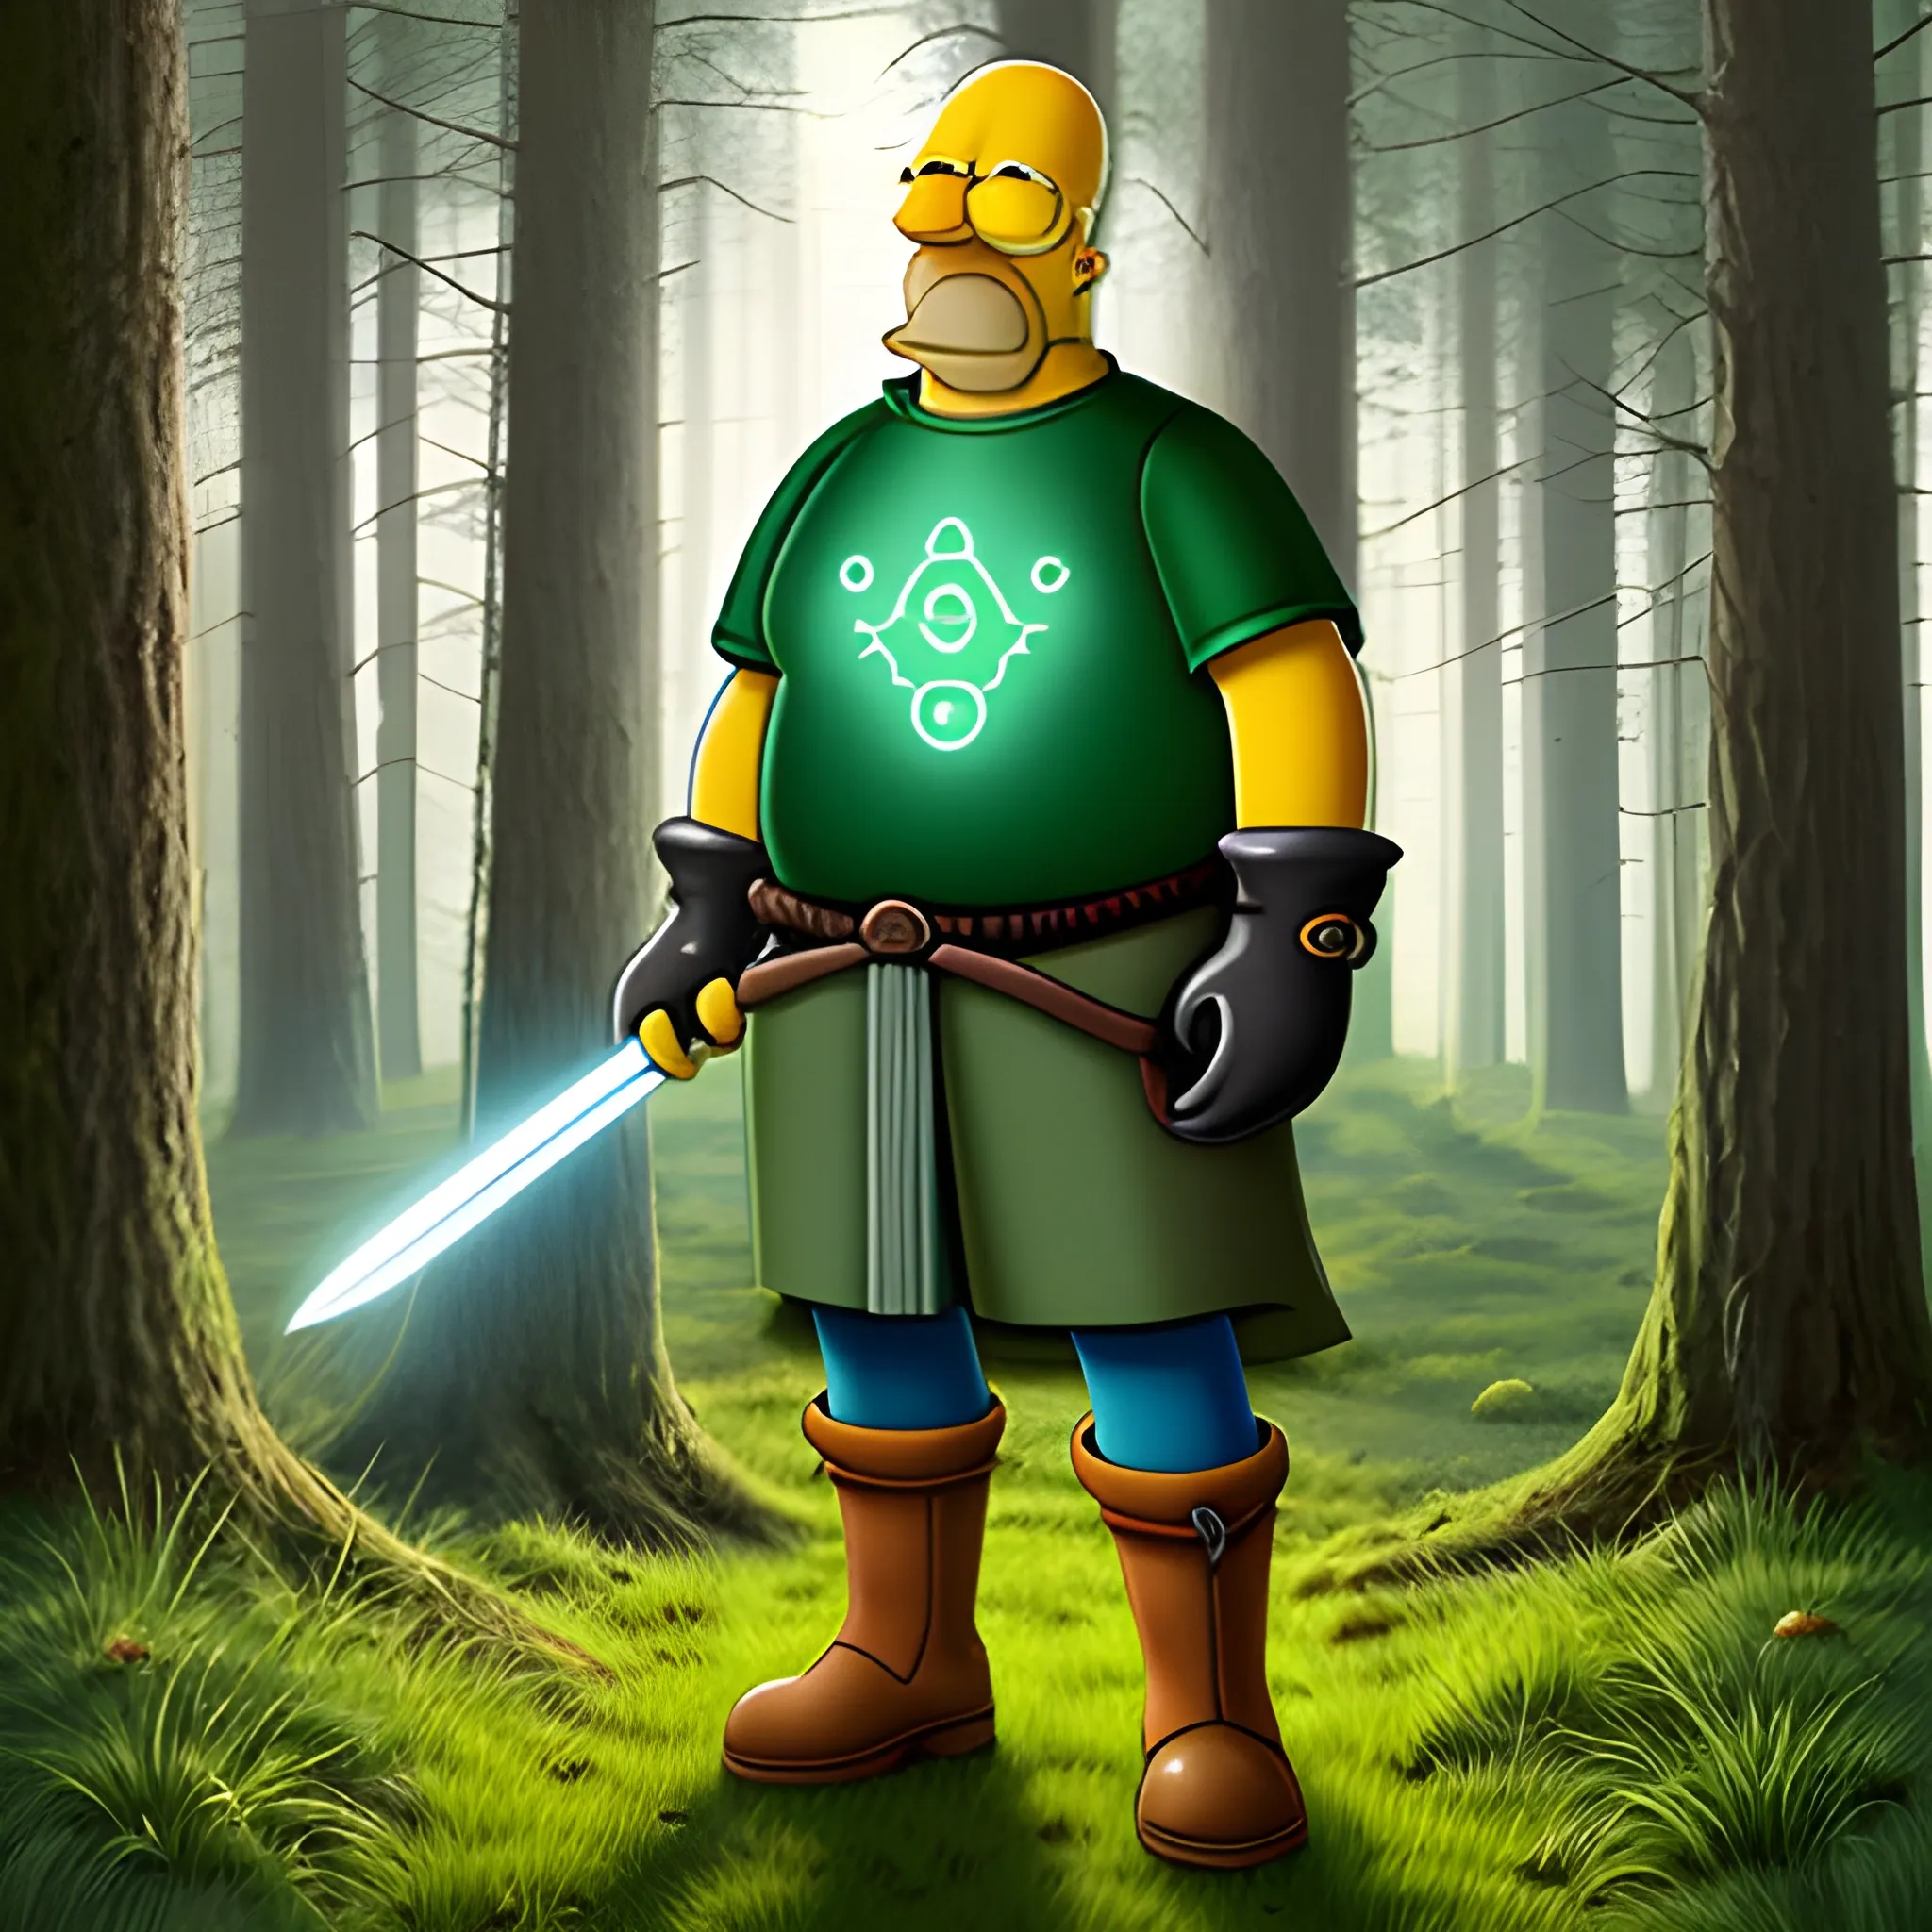 Homer Simpson, standing on a forest path, which is covered with grass and trees at the edges, he is dressed in dark green boots, the clothes of an ancient sorcerer and holds a magic wand that glows with a blue light, fighting with other knight with a sword